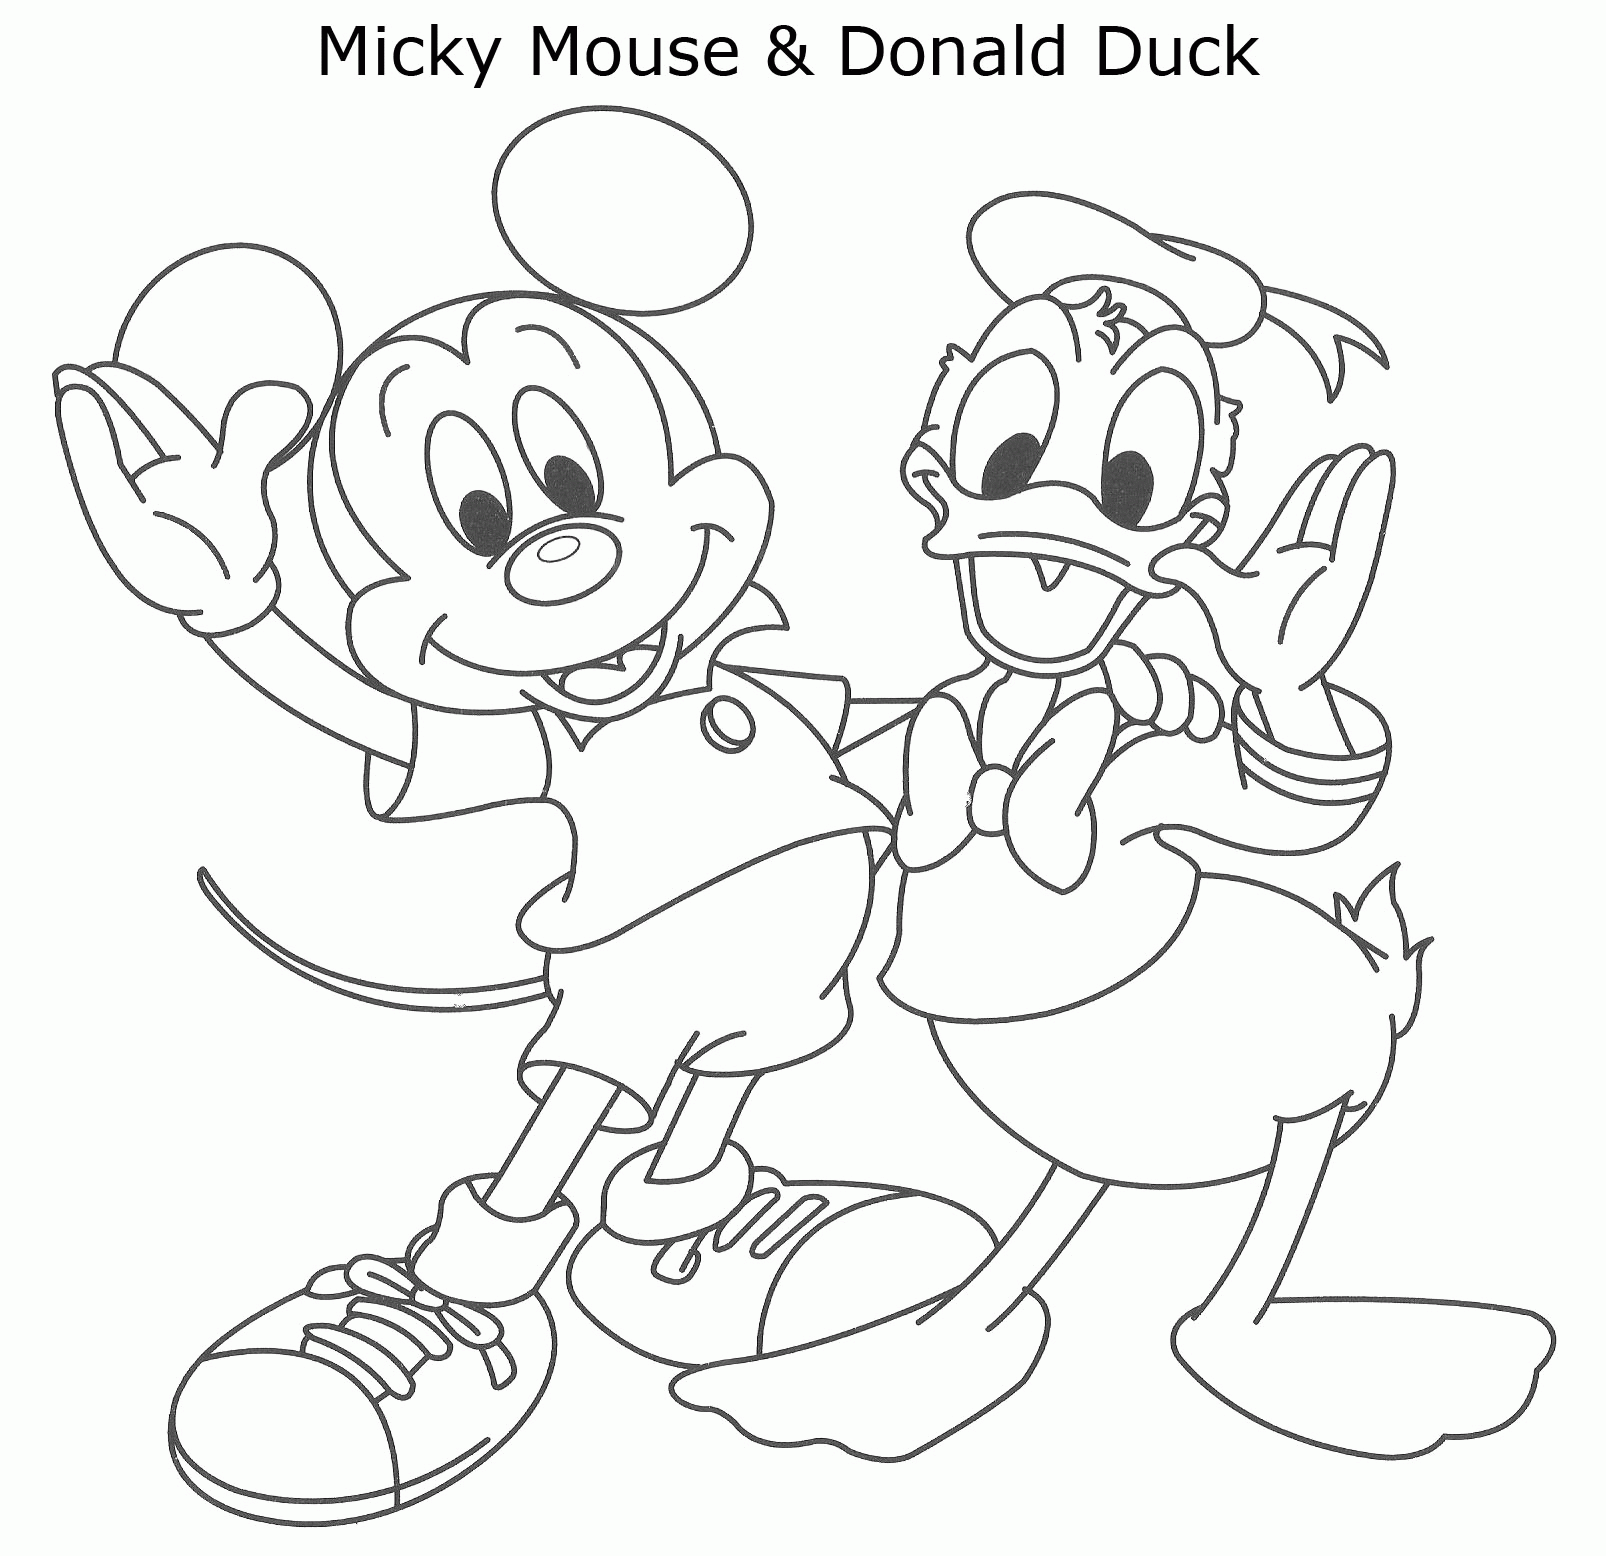 Related Donald Duck Coloring Pages item-7320, Donald Duck Coloring ...